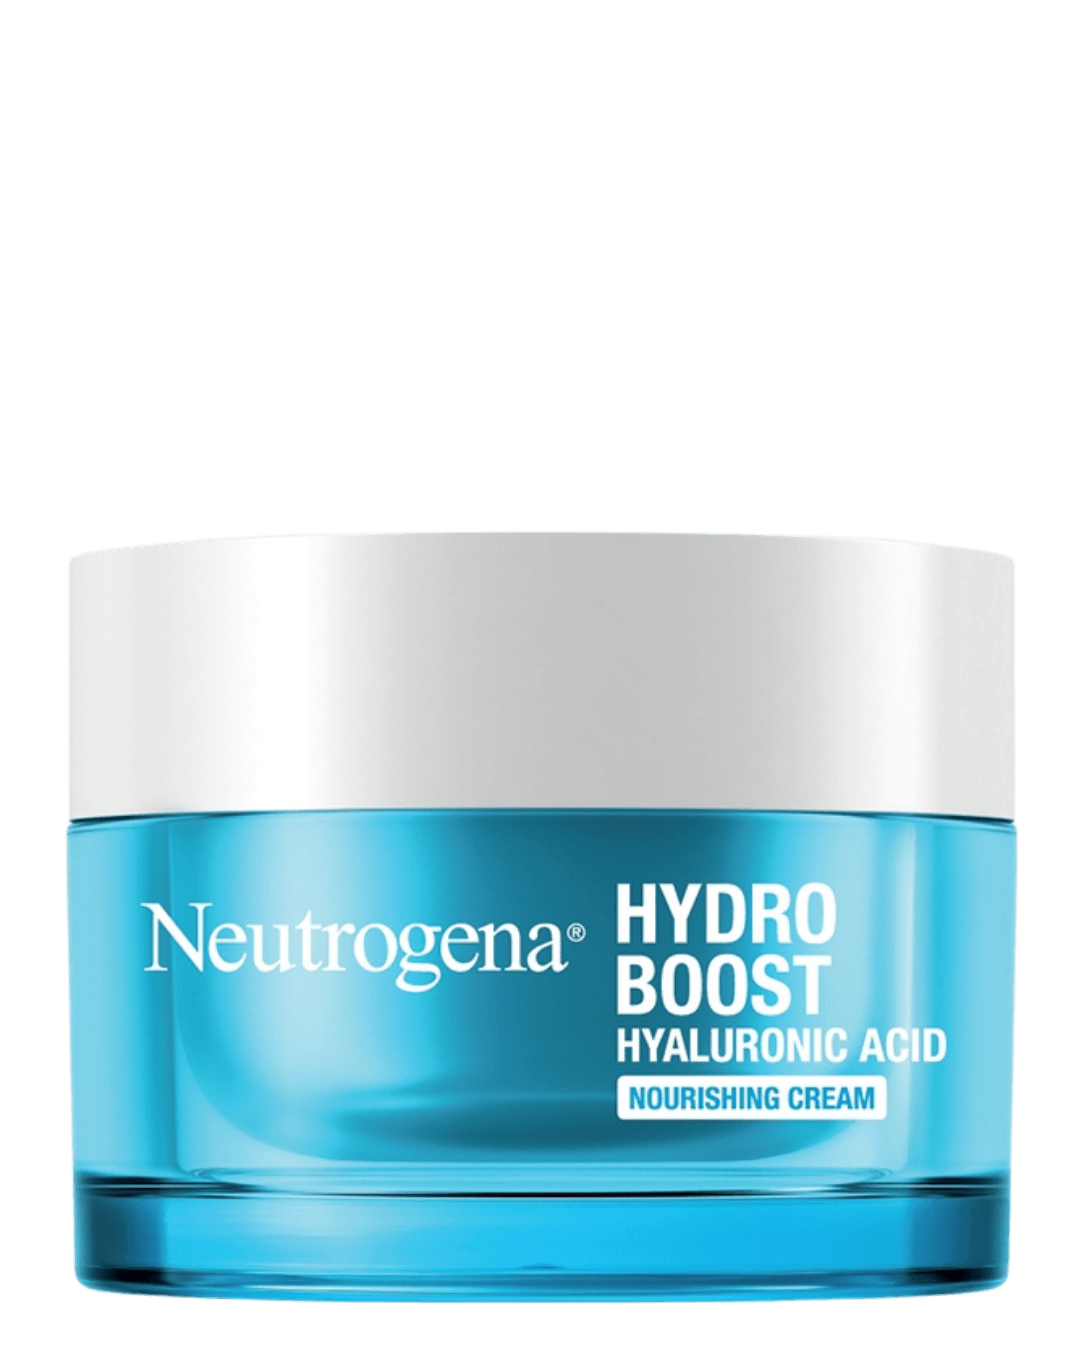 Daily Vanity Beauty Awards 2024 Best  Neutrogena® Hydro Boost Hyaluronic Acid Nourishing Cream Voted By Beauty Experts